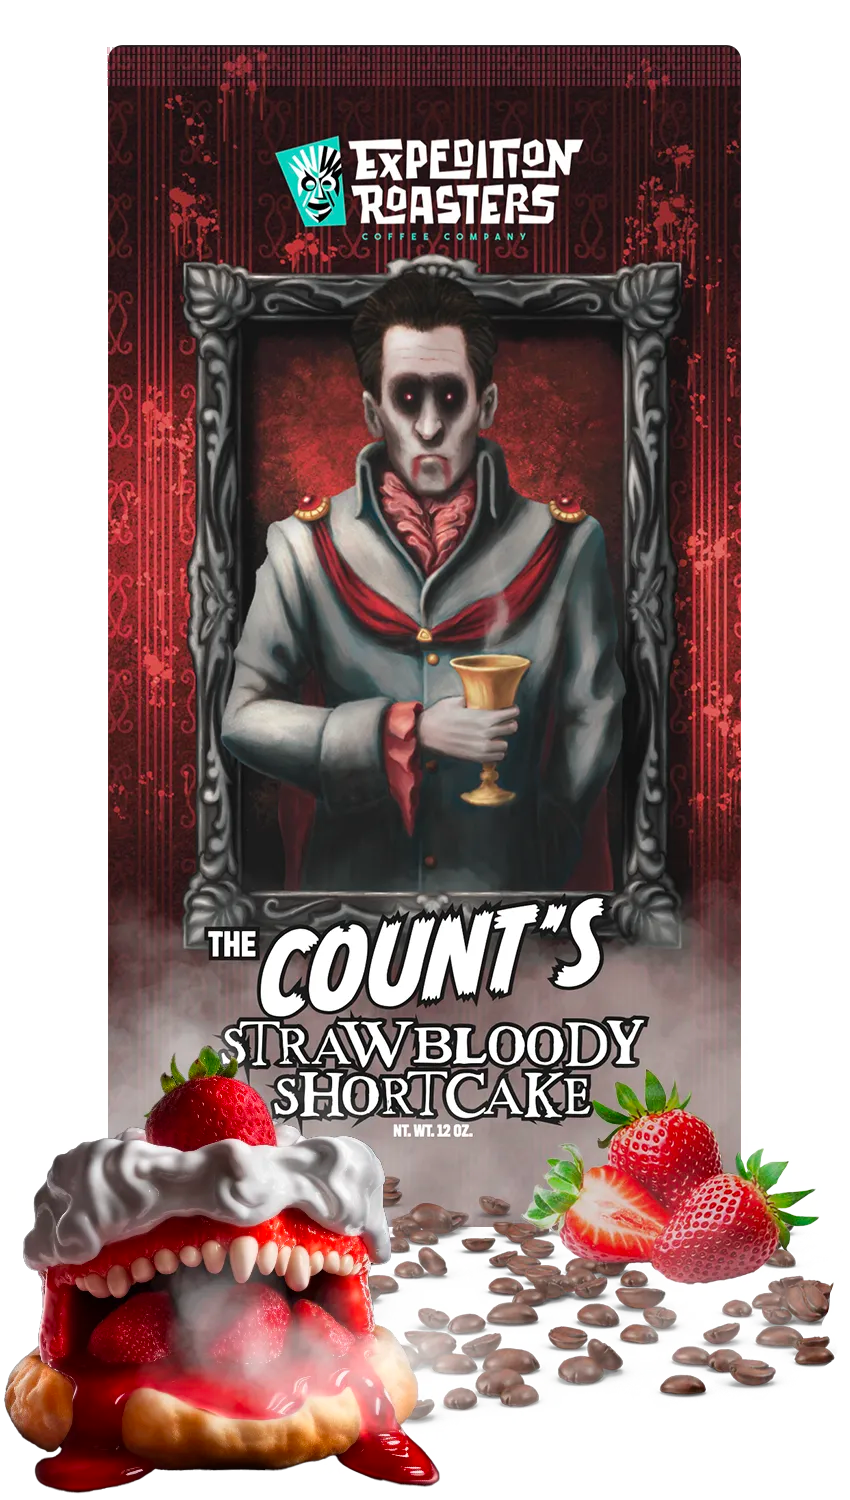 The Count's Strawbloody Shortcake